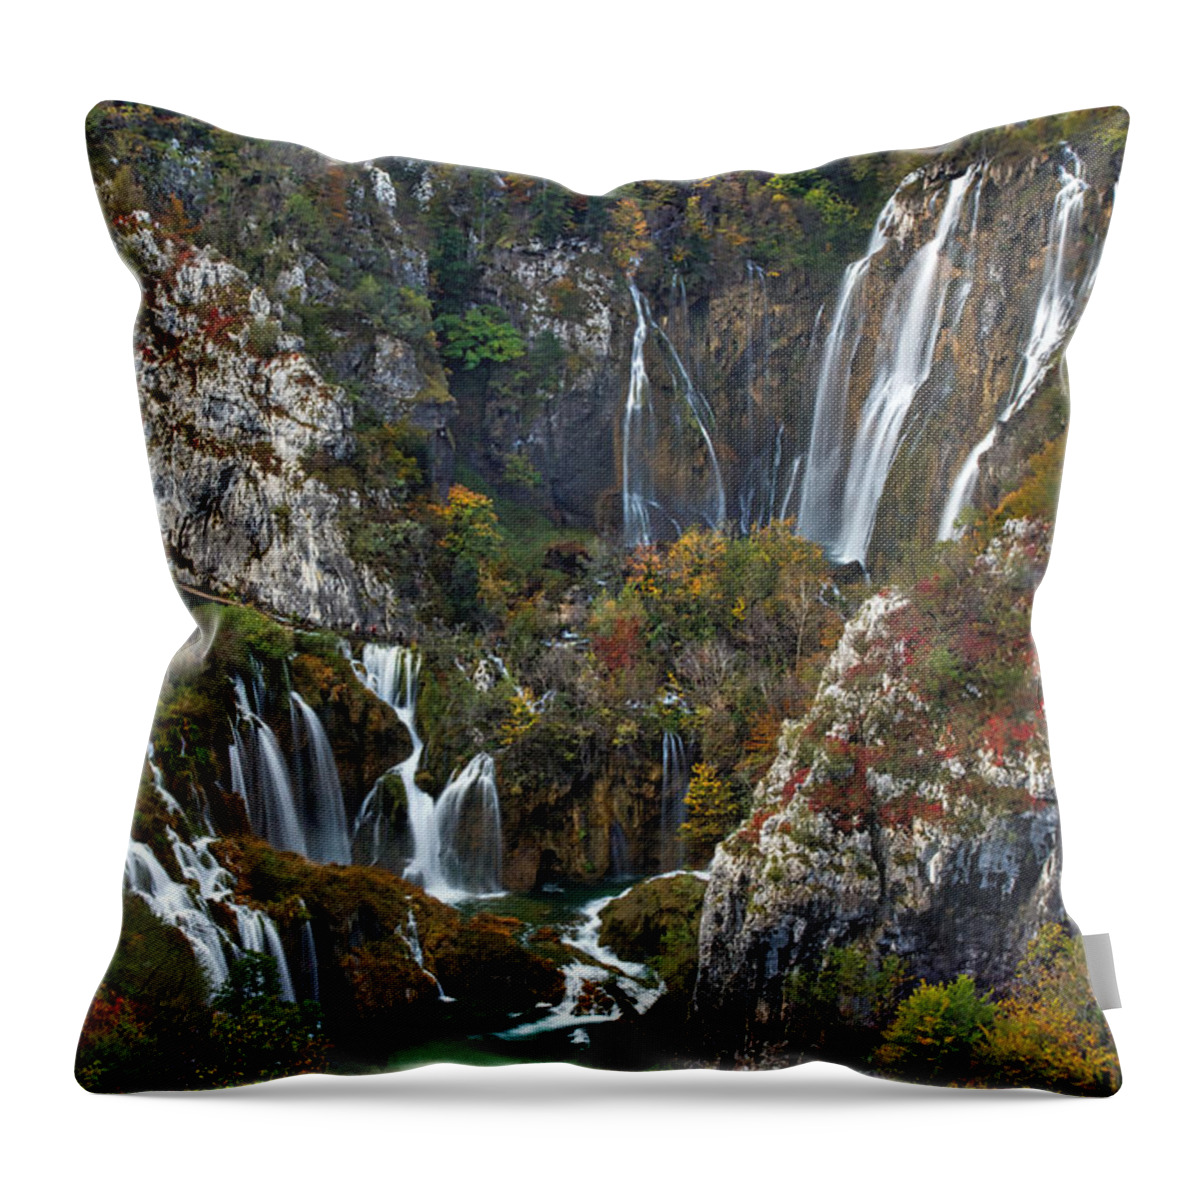 Croatia Throw Pillow featuring the photograph Big and Small Waterfalls - Croatia by Stuart Litoff